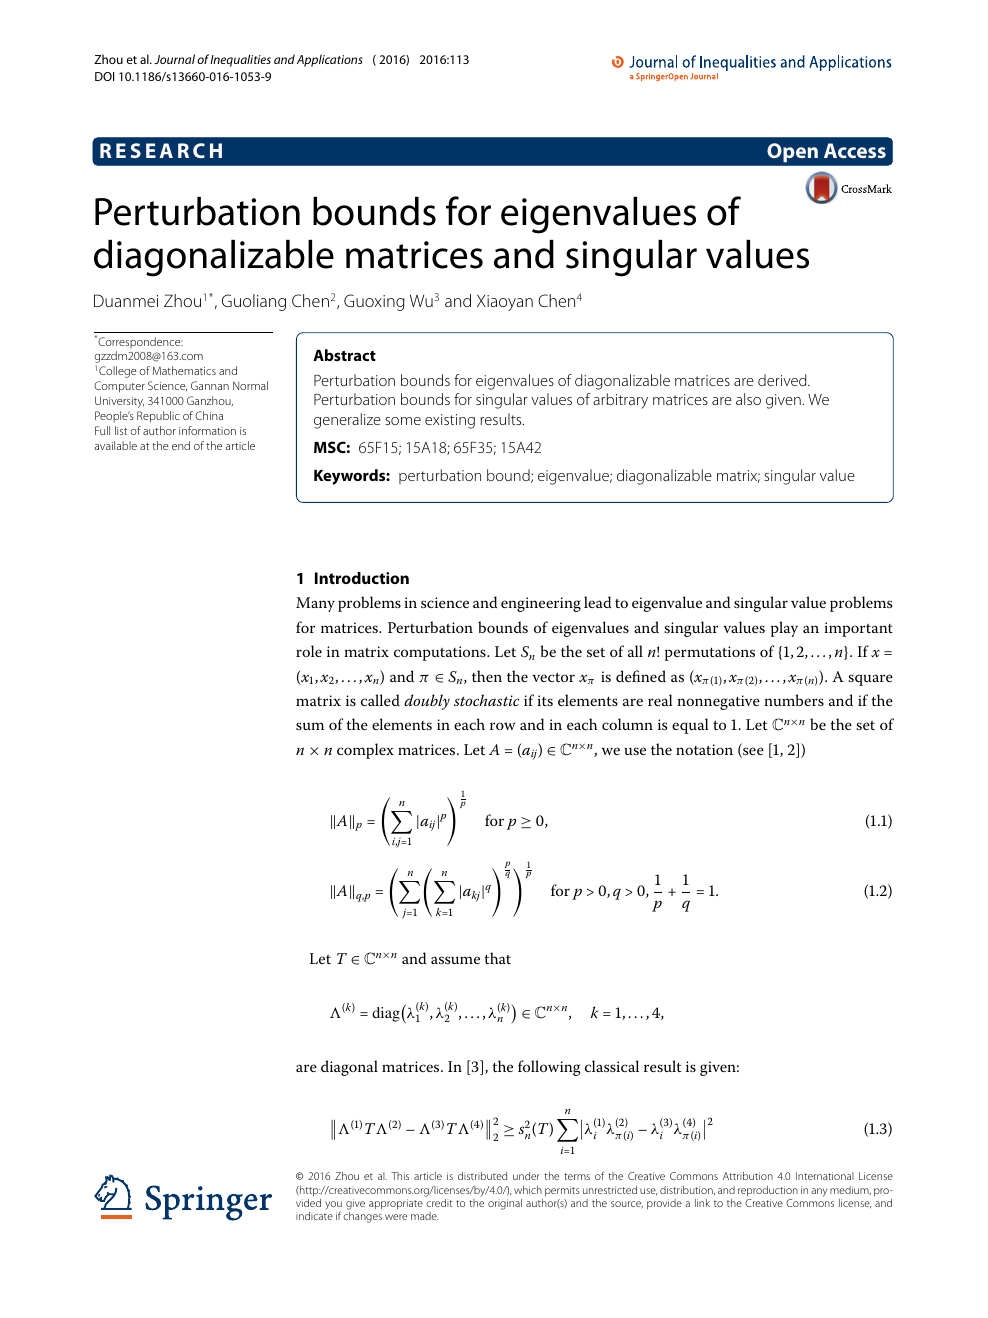 Perturbation Bounds For Eigenvalues Of Diagonalizable Matrices And Singular Values Topic Of Research Paper In Mathematics Download Scholarly Article Pdf And Read For Free On Cyberleninka Open Science Hub